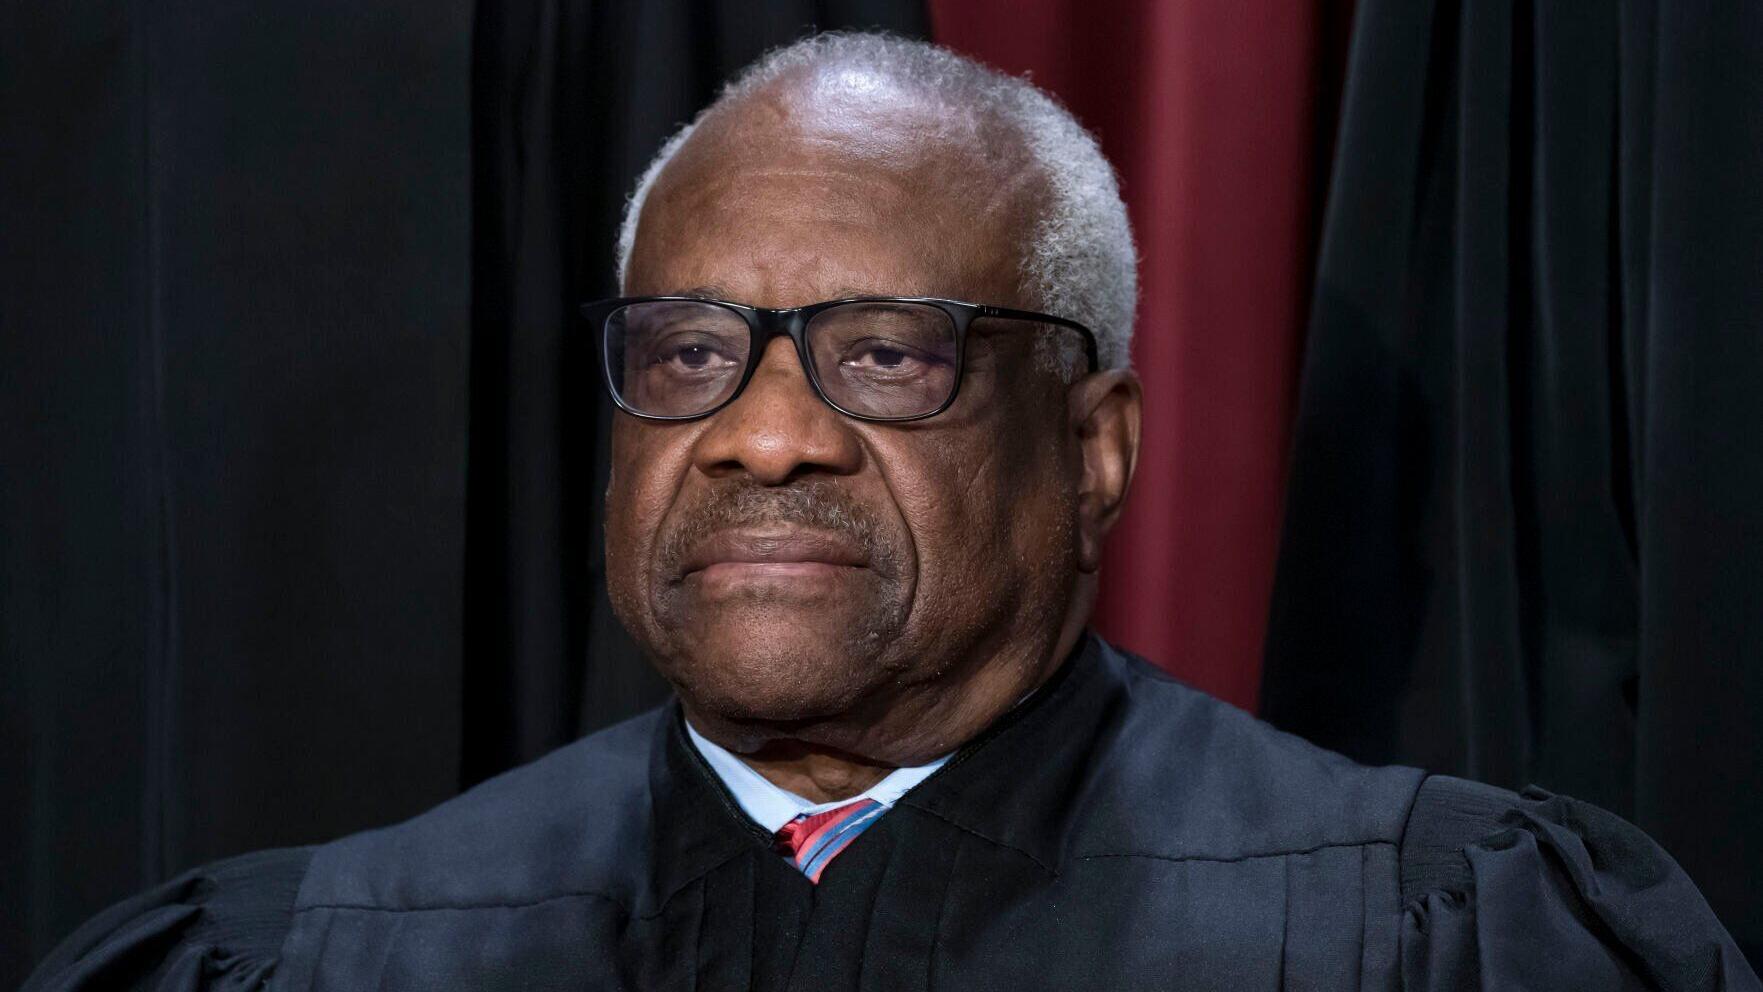 Clarence Thomas' undisclosed luxury travels included Nebraska football games, report says